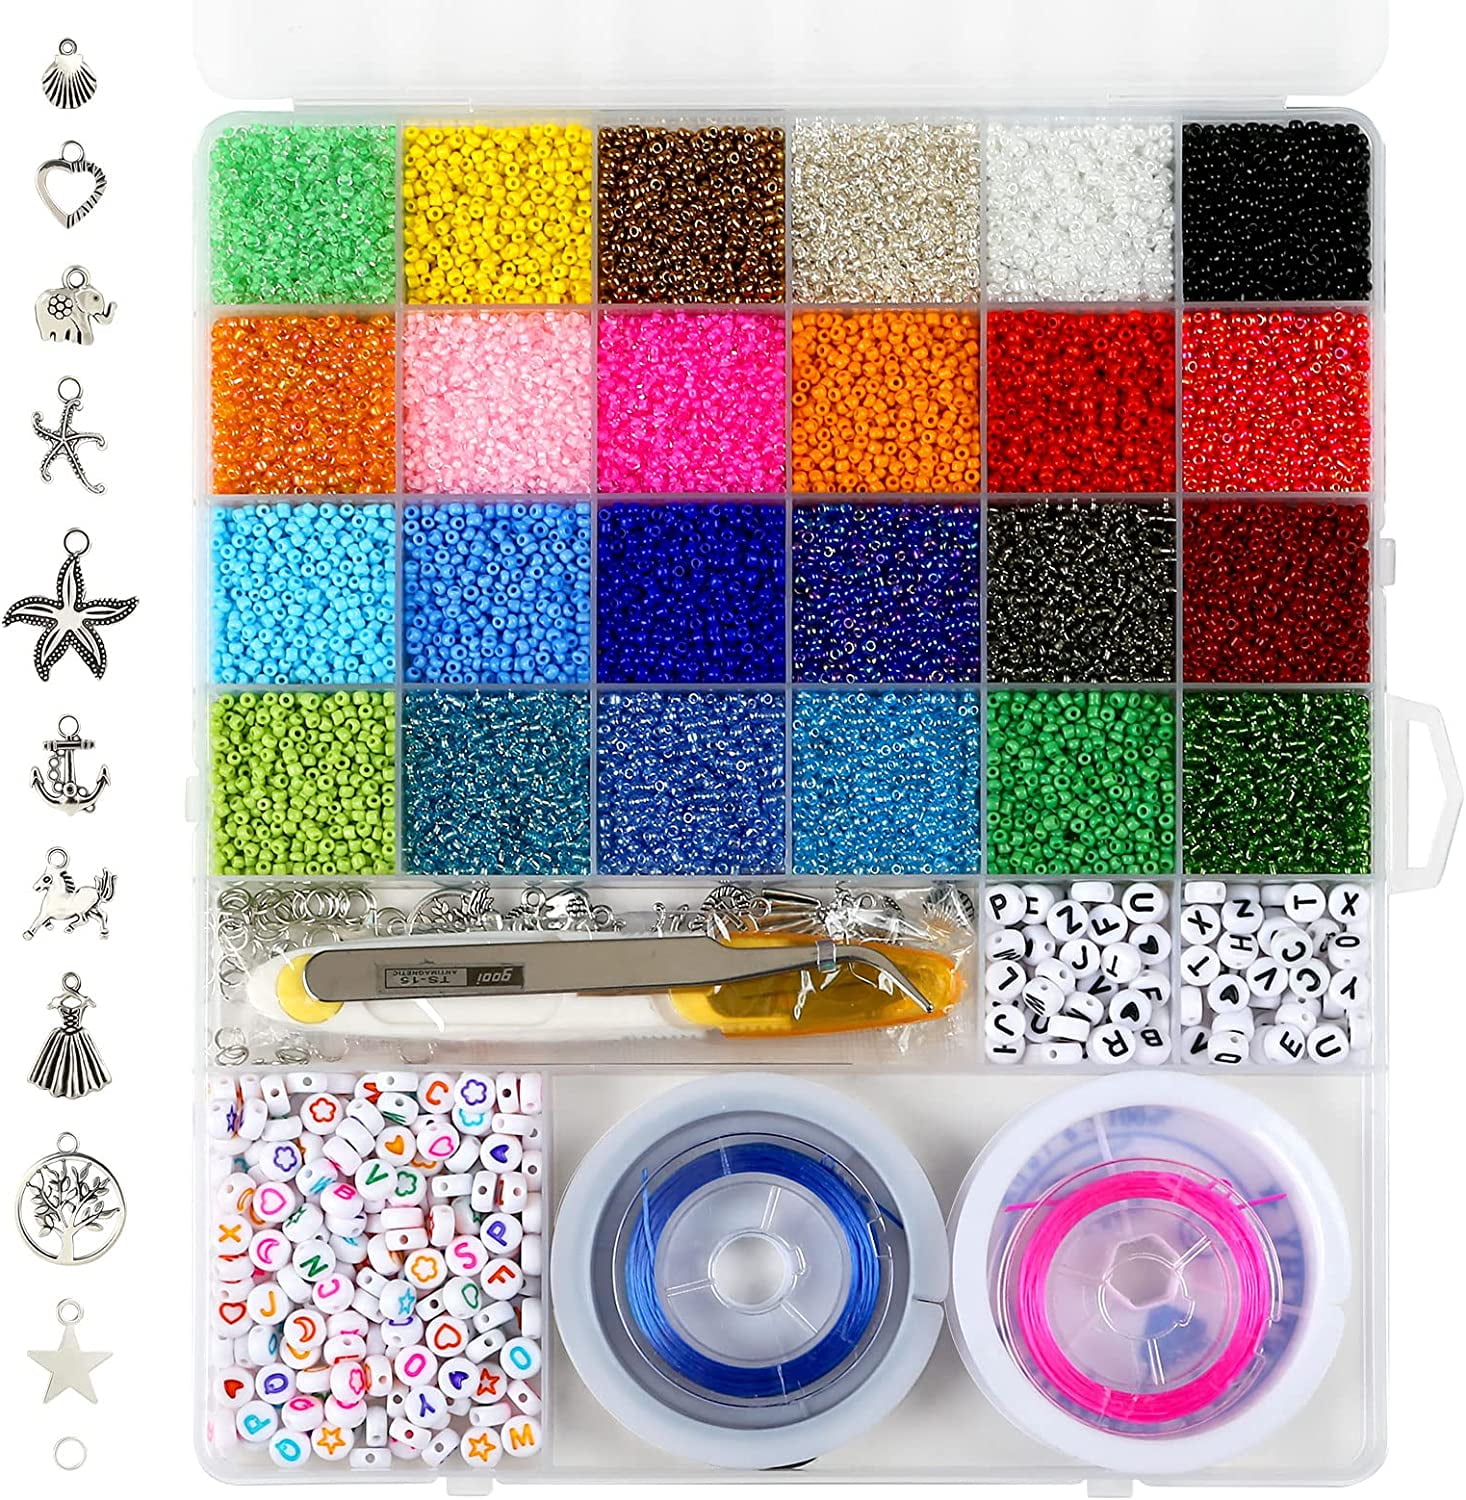  AUAUY Glass Seed Beads, Bracelet Making Kit for Beginner, 7280  Beads for Bracelets Making Pony Beads Polymer Glass Seed Beads Letter Beads  for Jewelry Making, DIY Arts and Crafts Gifts for